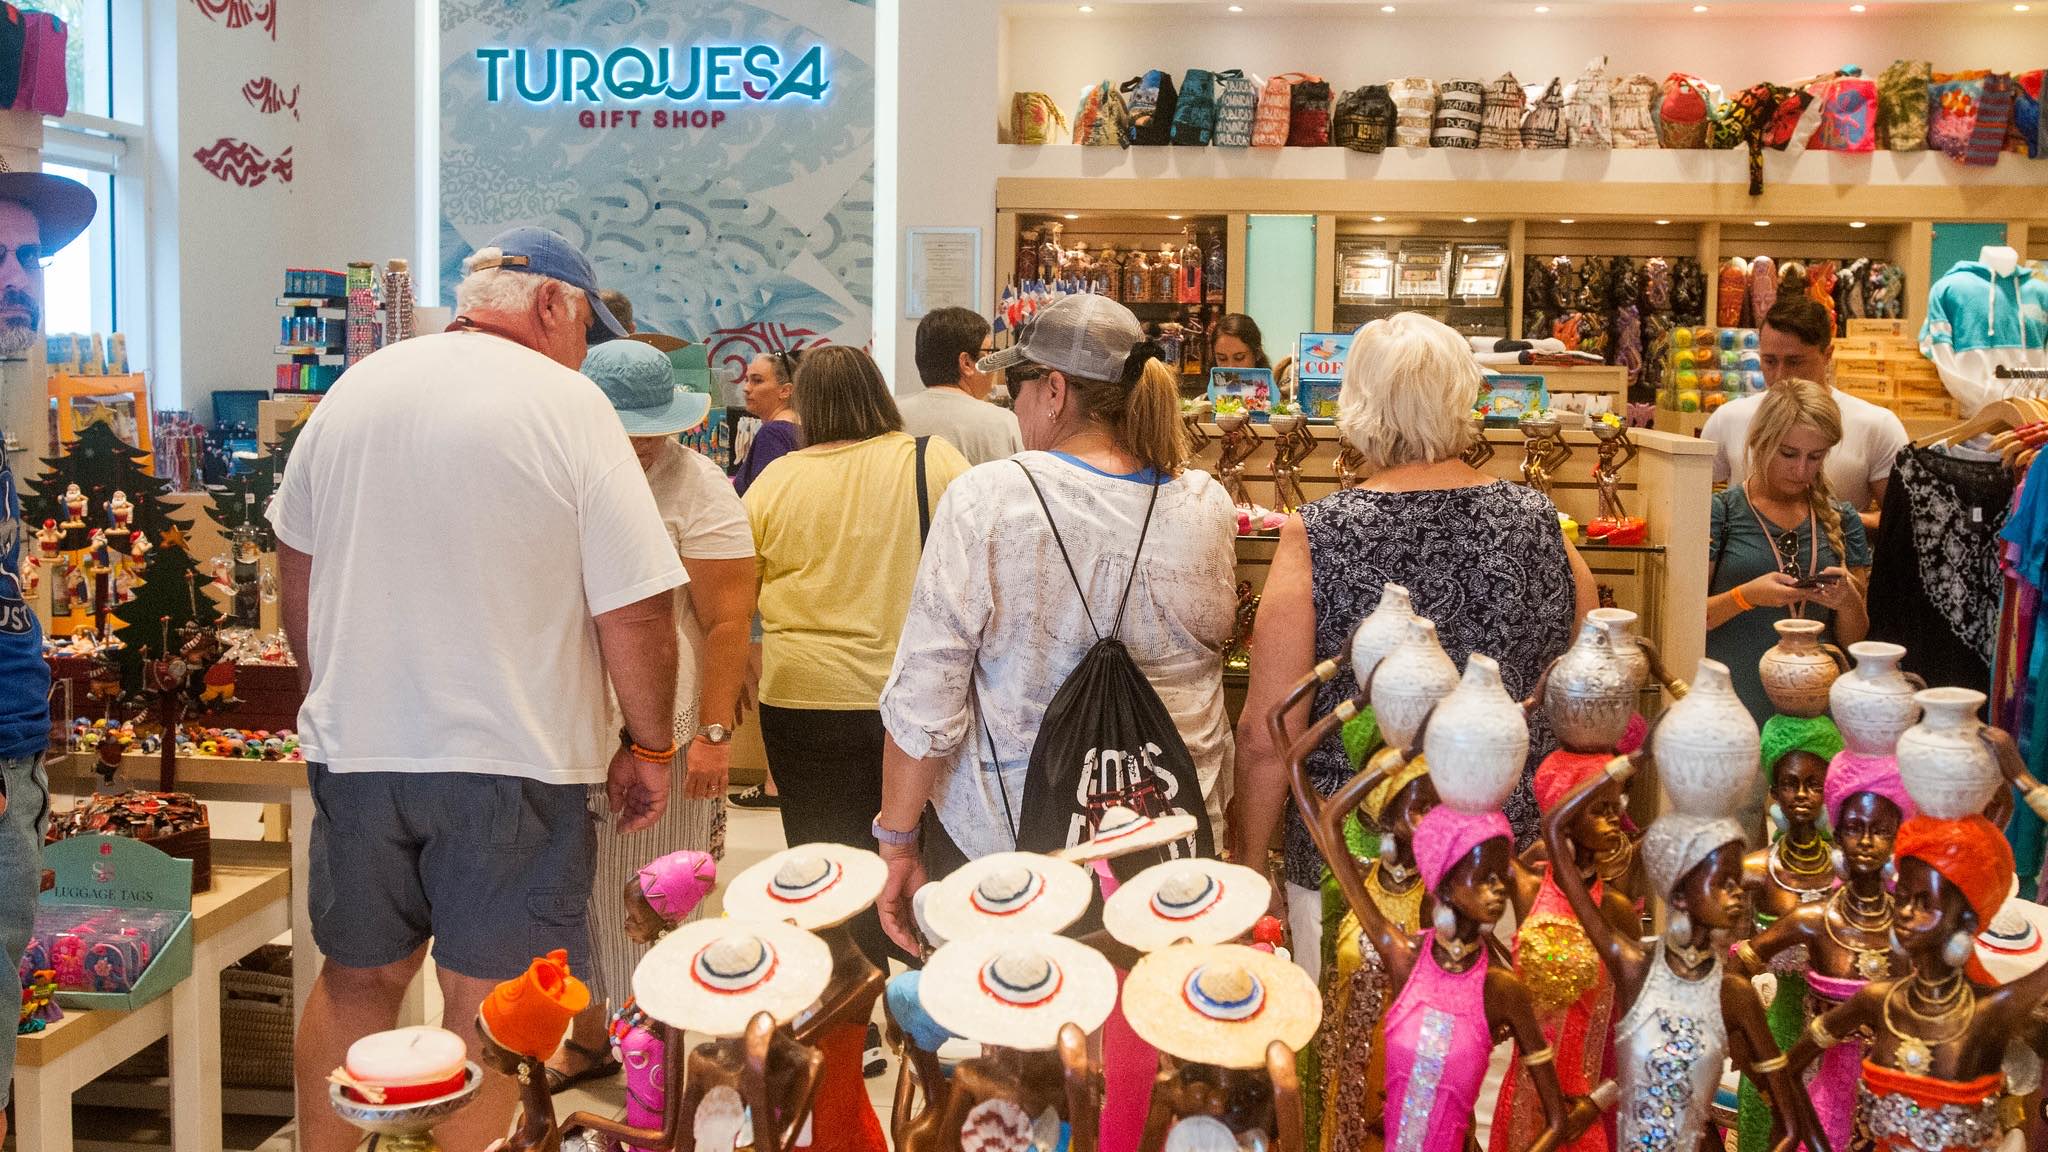 Customers in a busy day at Turquesa shop